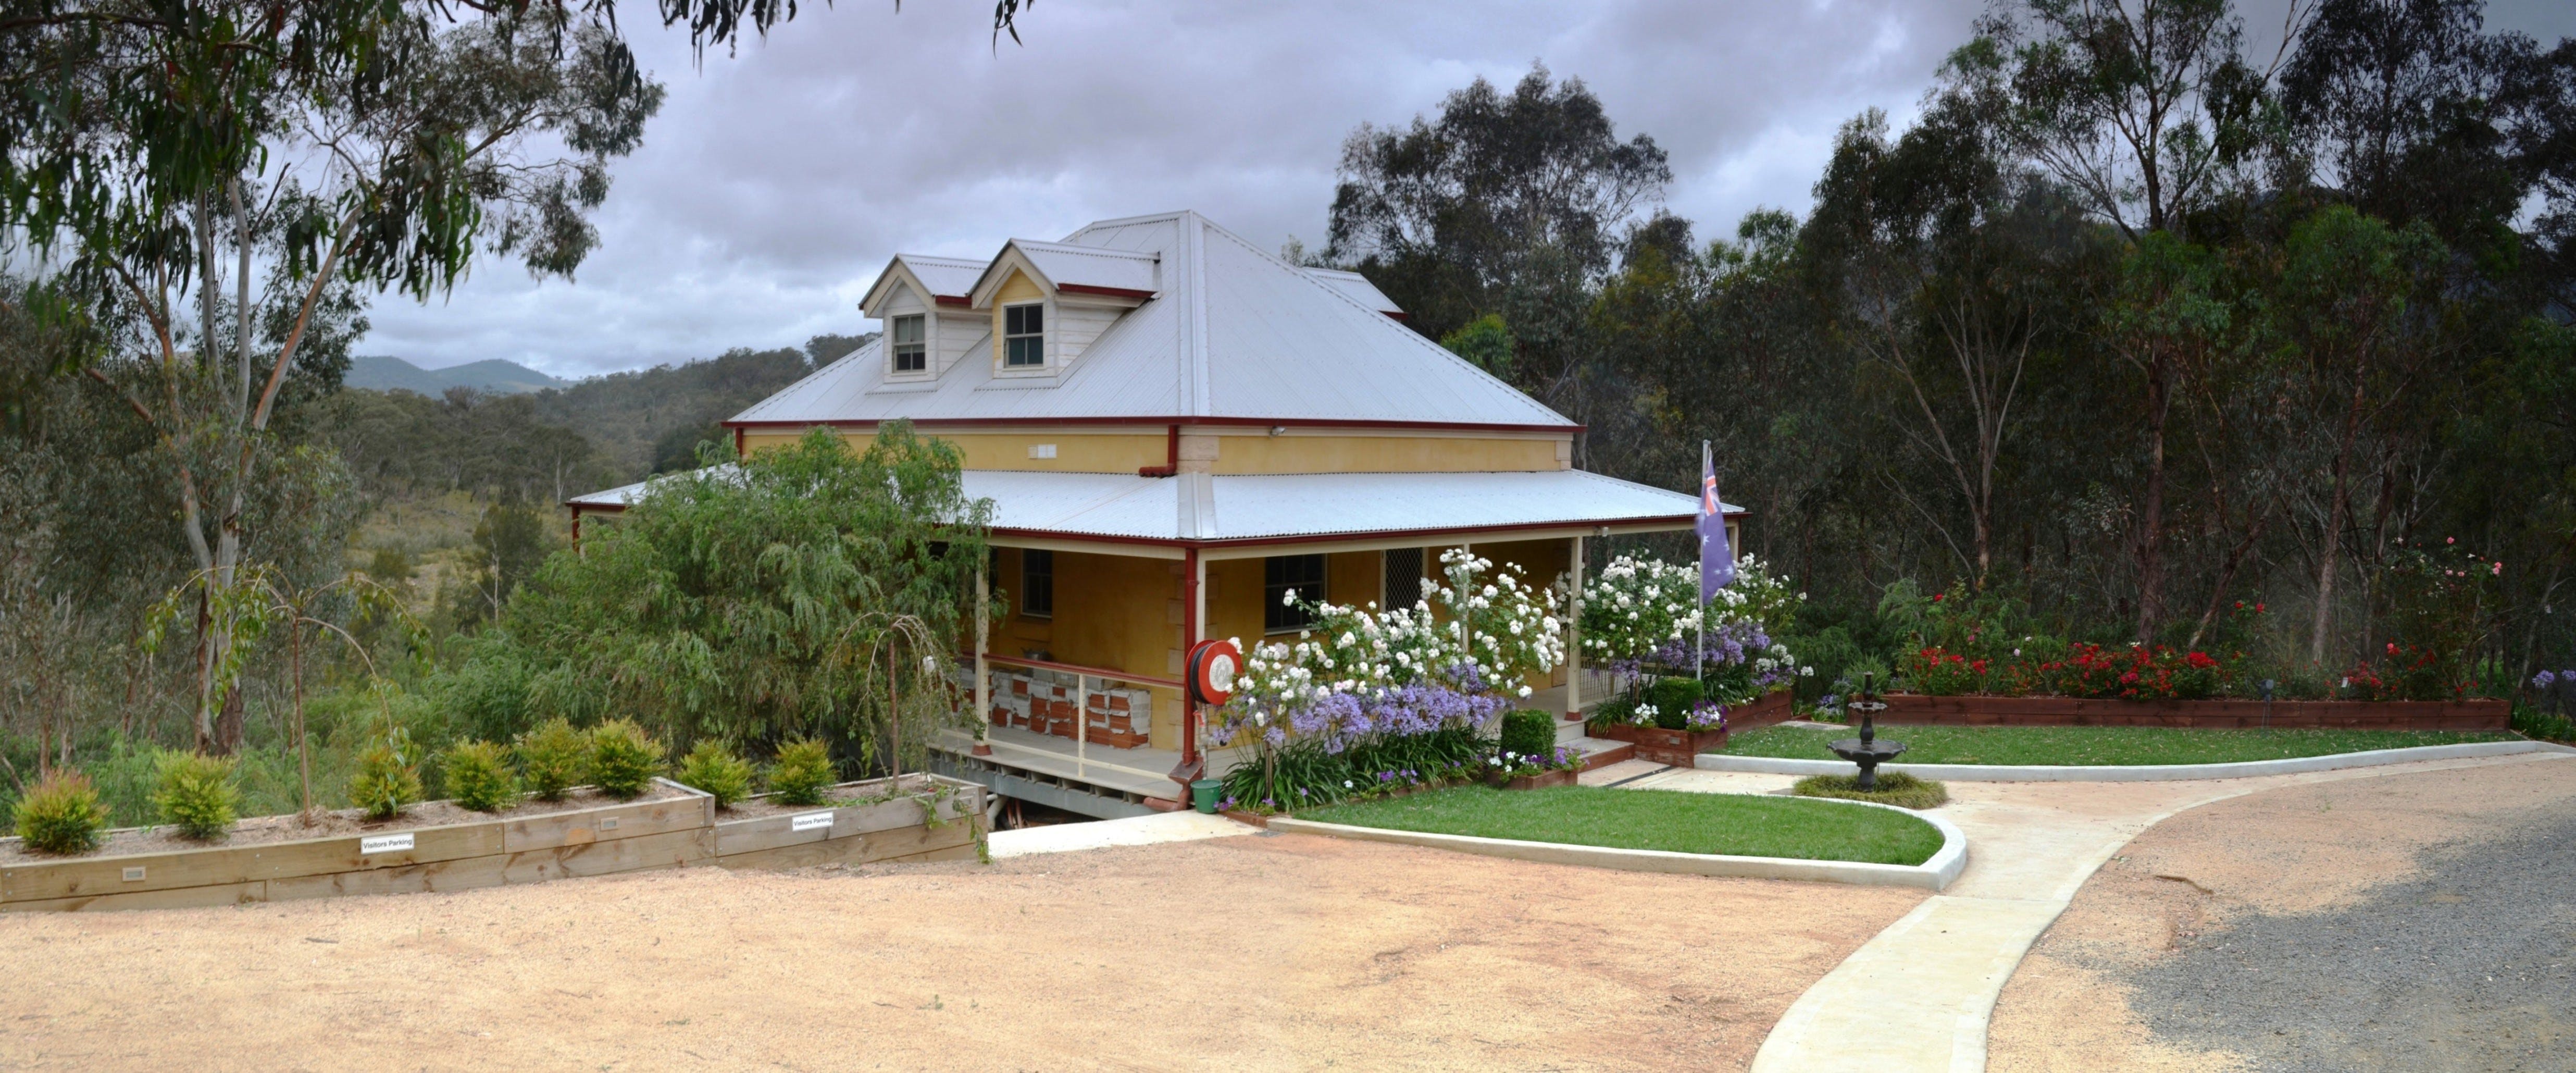 Tanwarra Lodge Bed and Breakfast - Accommodation Sydney